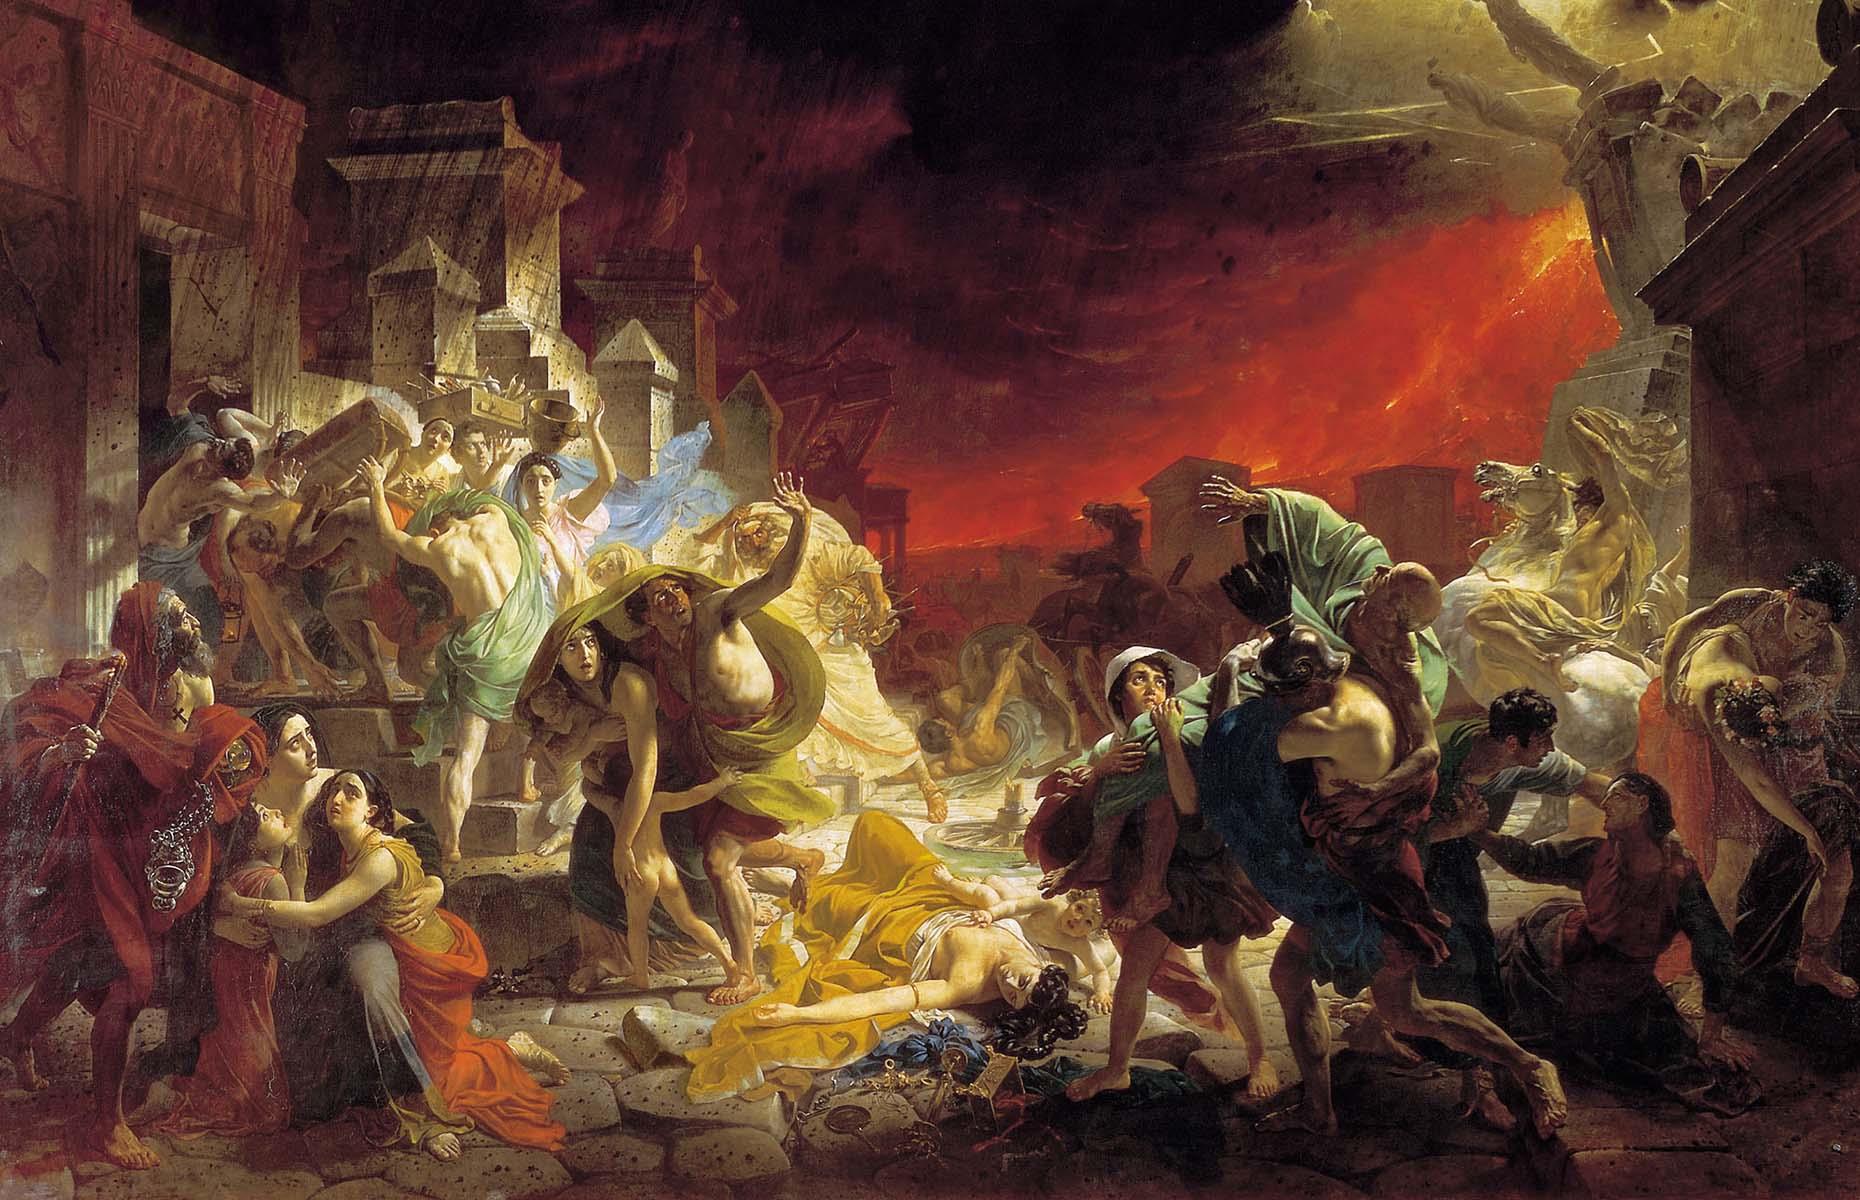 <p>The eruption of Mount Vesuvius inspired countless artworks recreating the drama of Pompeii’s demise – albeit with varying levels of accuracy – both tapping into and helping to maintain public appetite for this tragic story. They include French artist Pierre-Jacques Volaire, British painter Joseph Wright of Derby (who created more than 30 works on the subject) and Russian Karl Bryullov, whose work is pictured here.</p>  <p>The last of these even prompted another creative endeavour in Edward Bulwer-Lytton’s popular potboiler novel <em>The Last Days of Pompeii</em>, which helped shape modern understandings of Pompeii.</p>